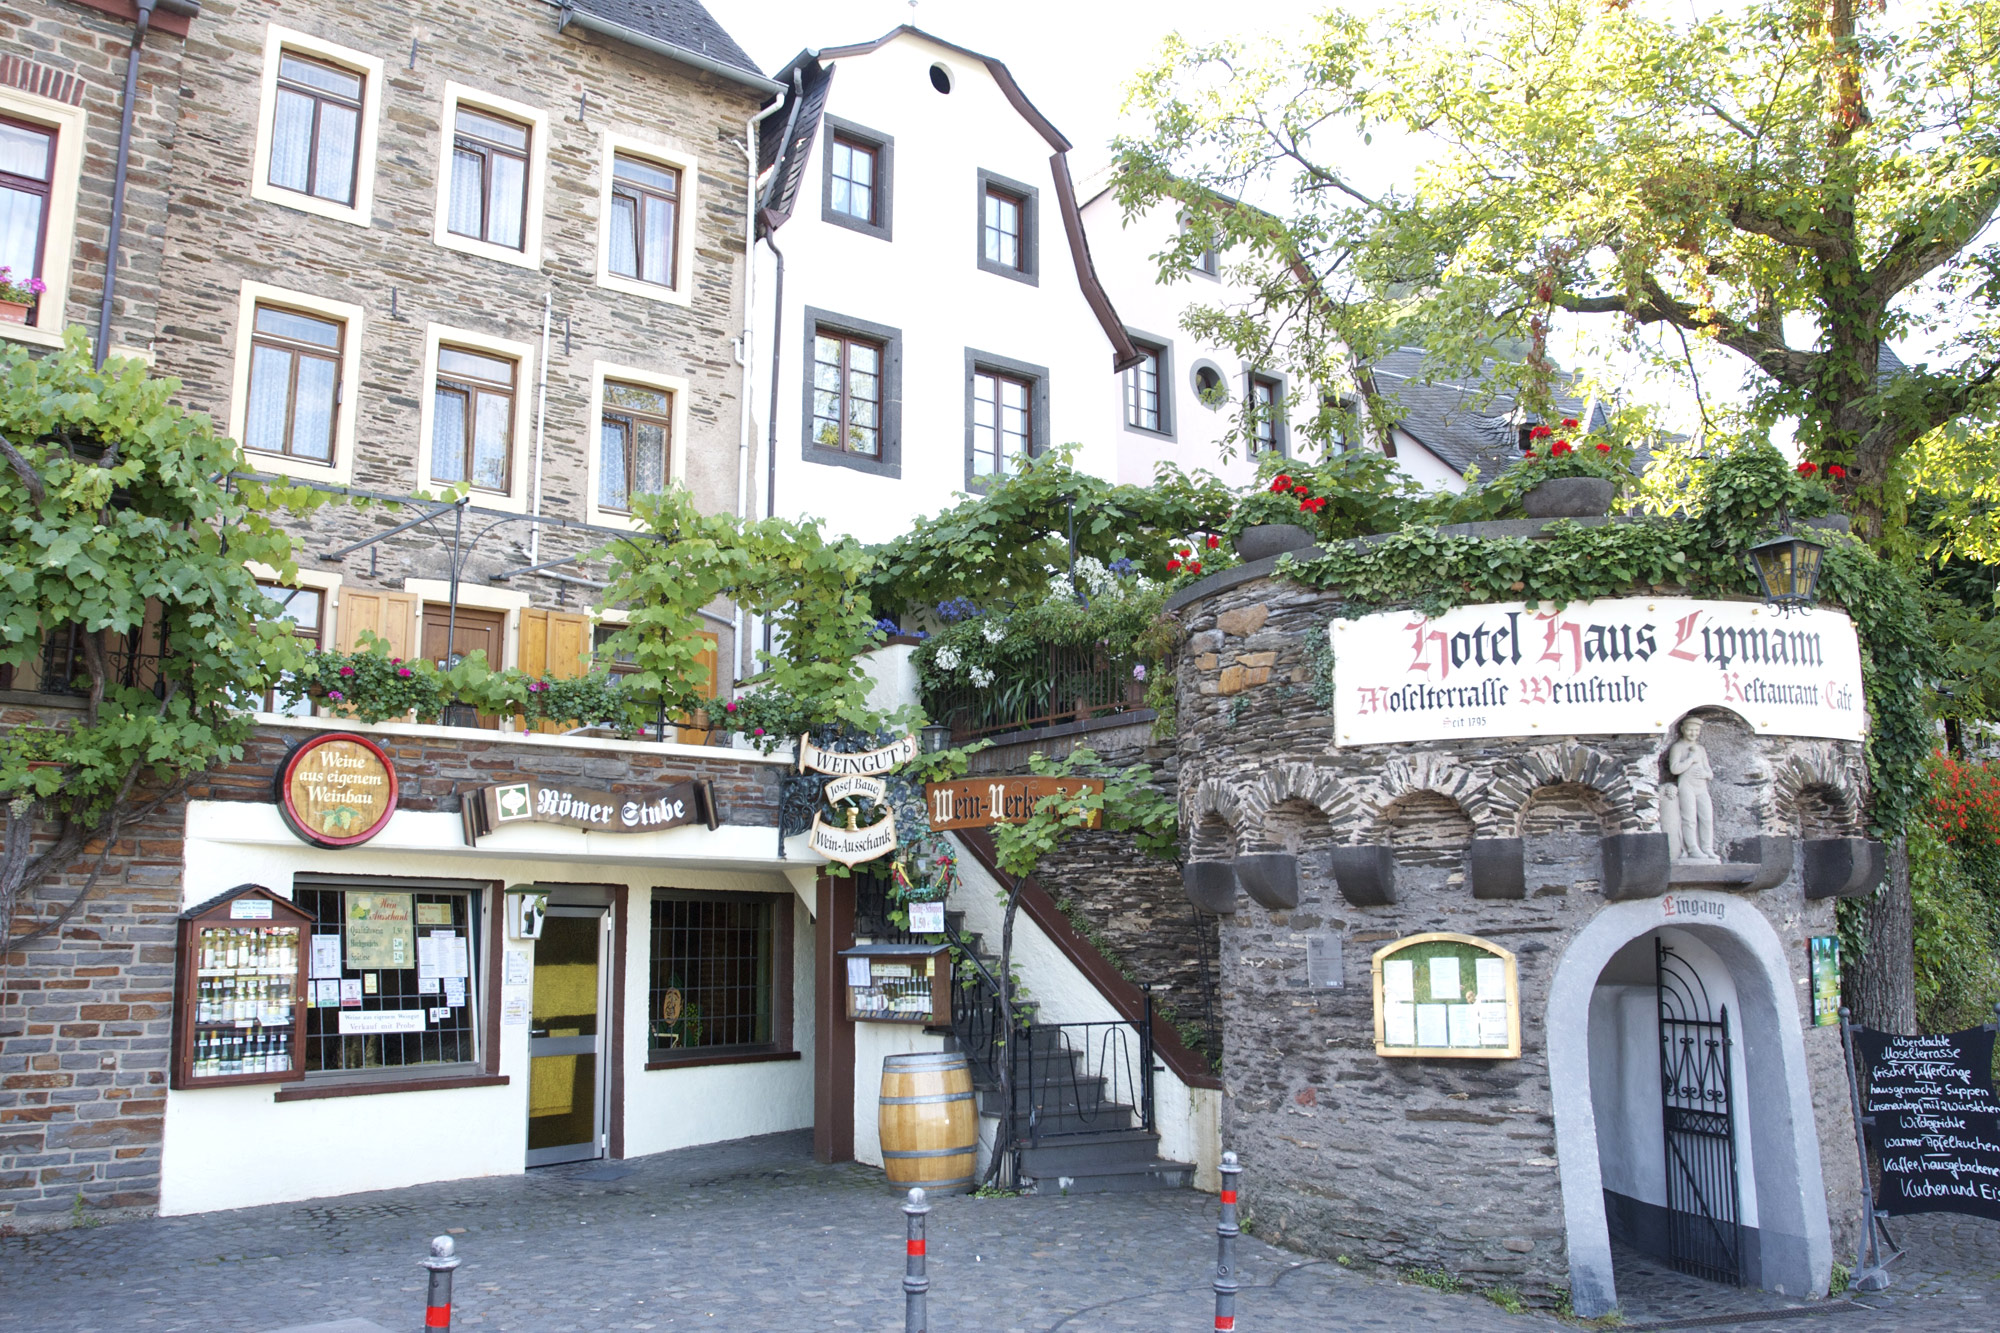 Hotel Haus Lipmann, our base in the Mosel